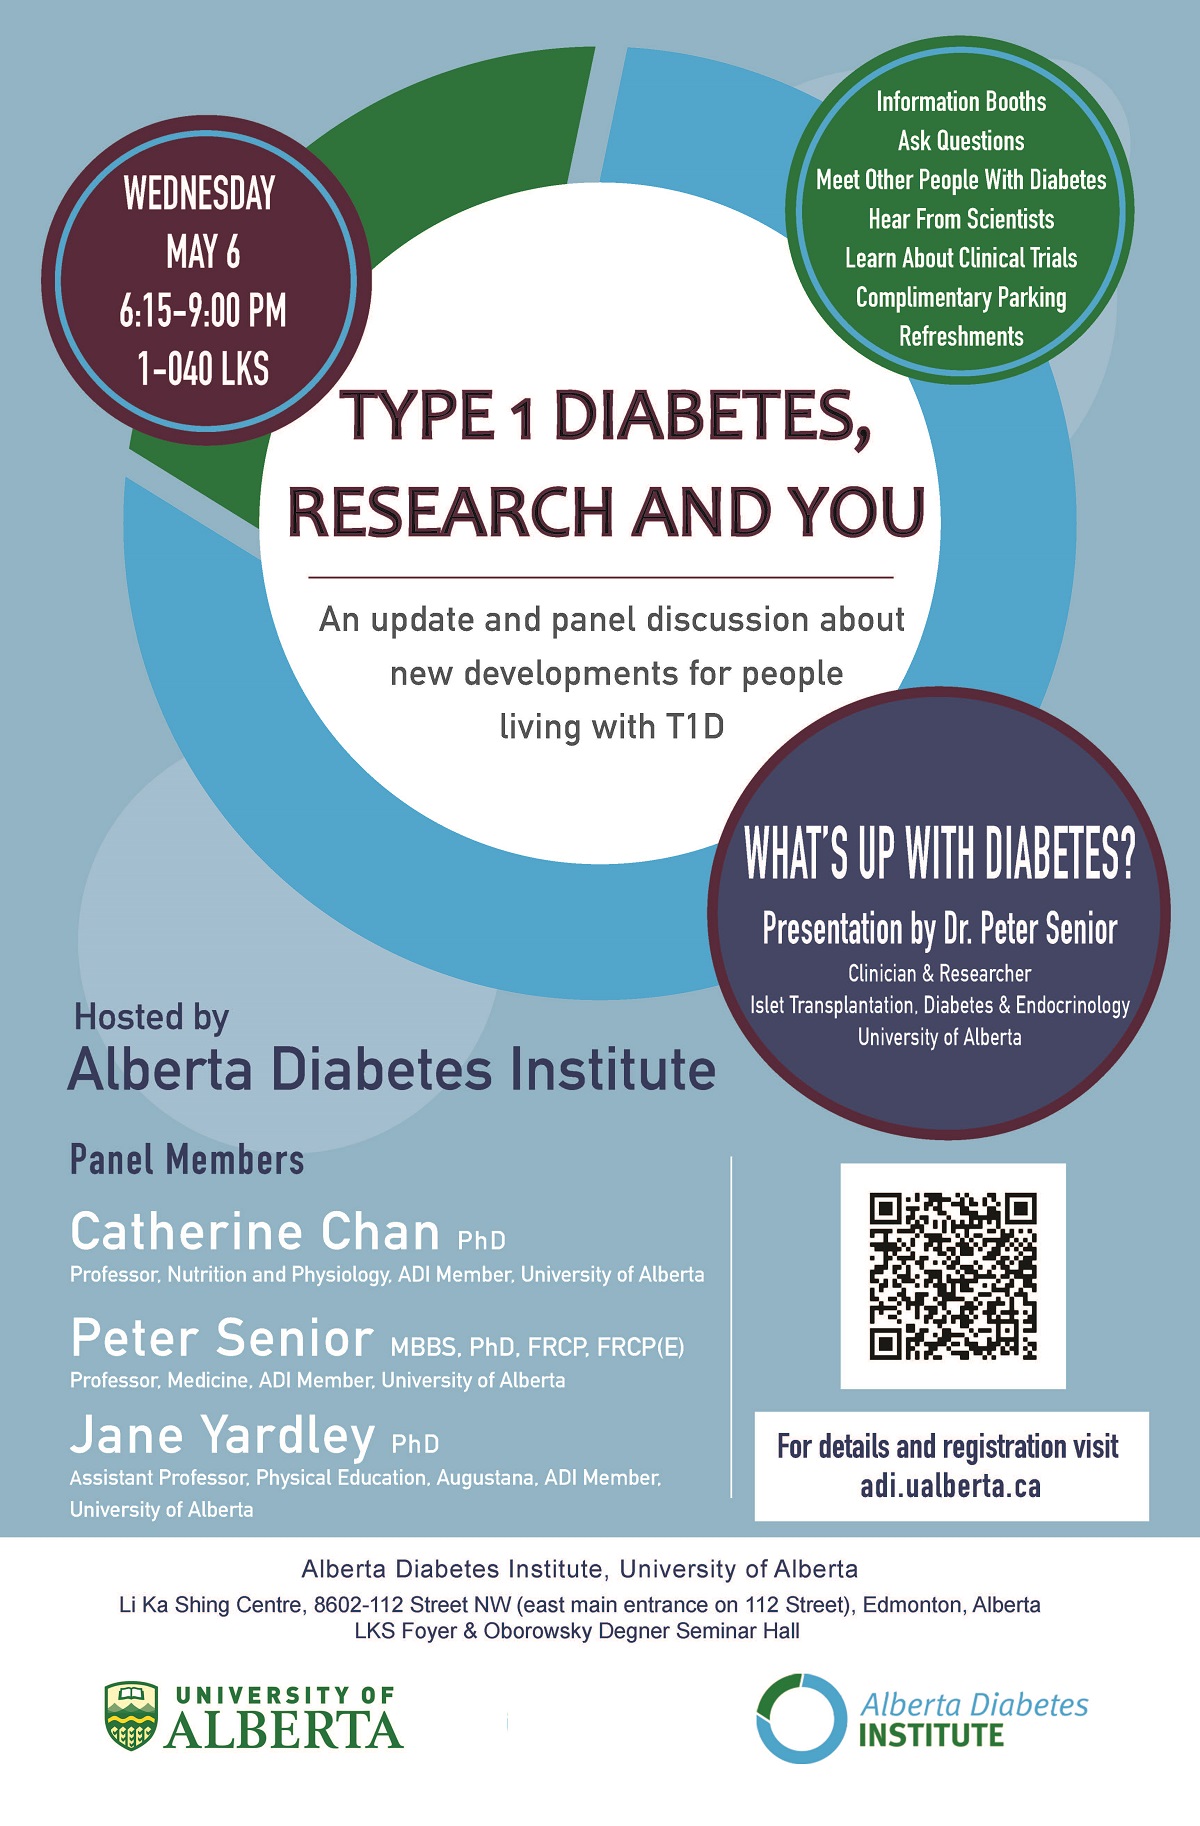 type 1 diabetes current research